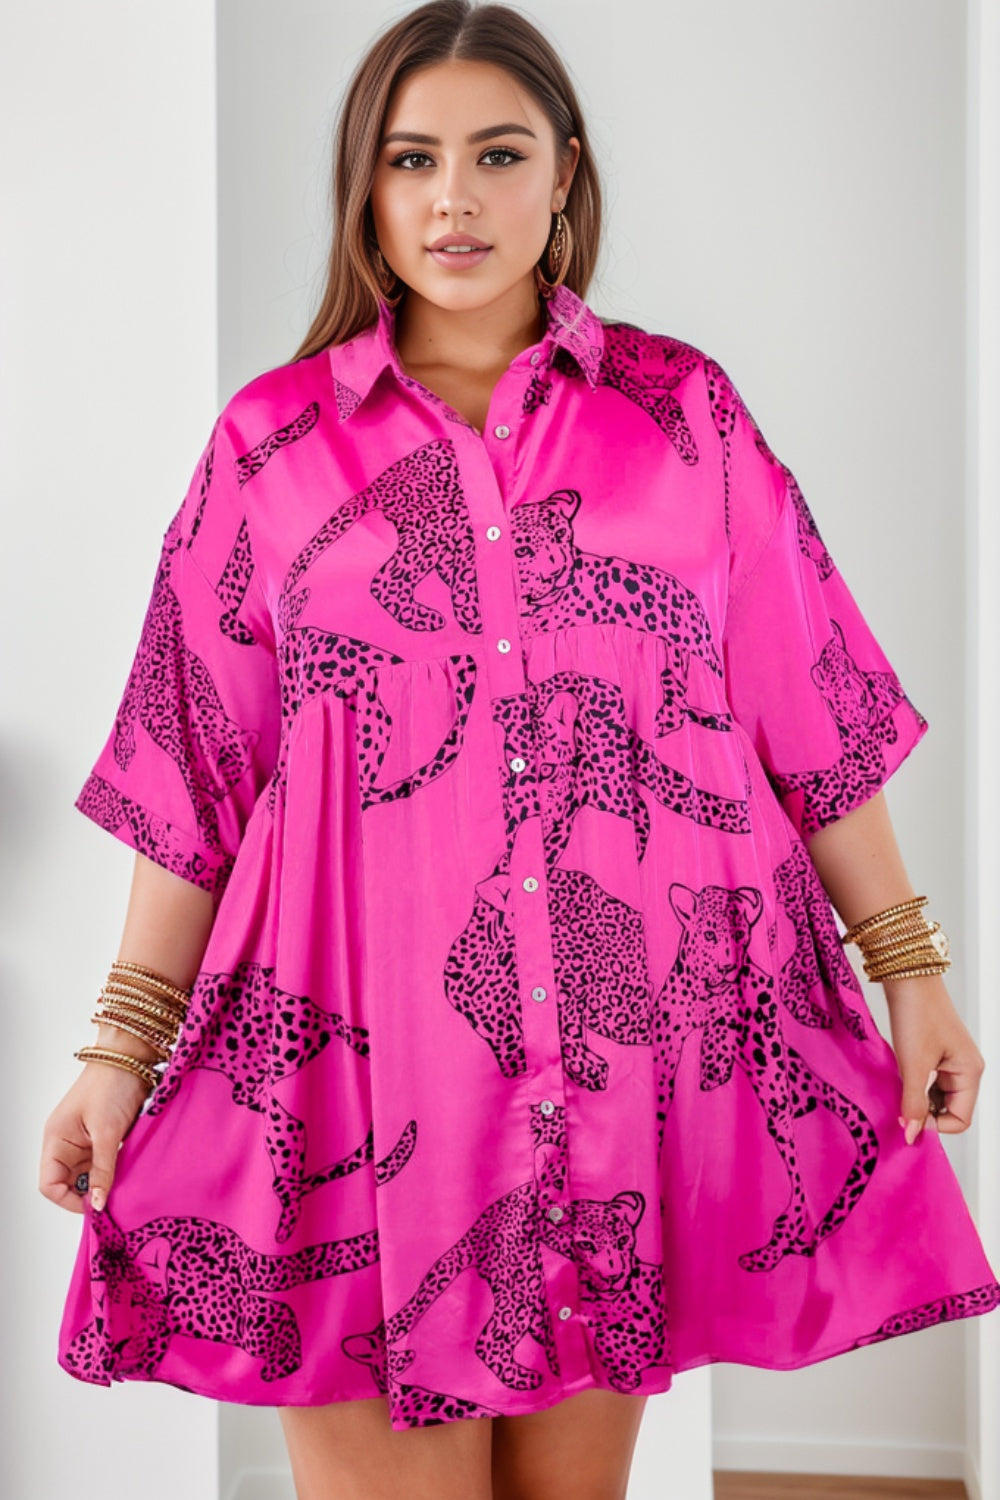 Elegant Plus Size Beach Wedding Guest Dress - Tiger Printed Button Up Half Sleeve for a Stunning Look at Any Summer Event